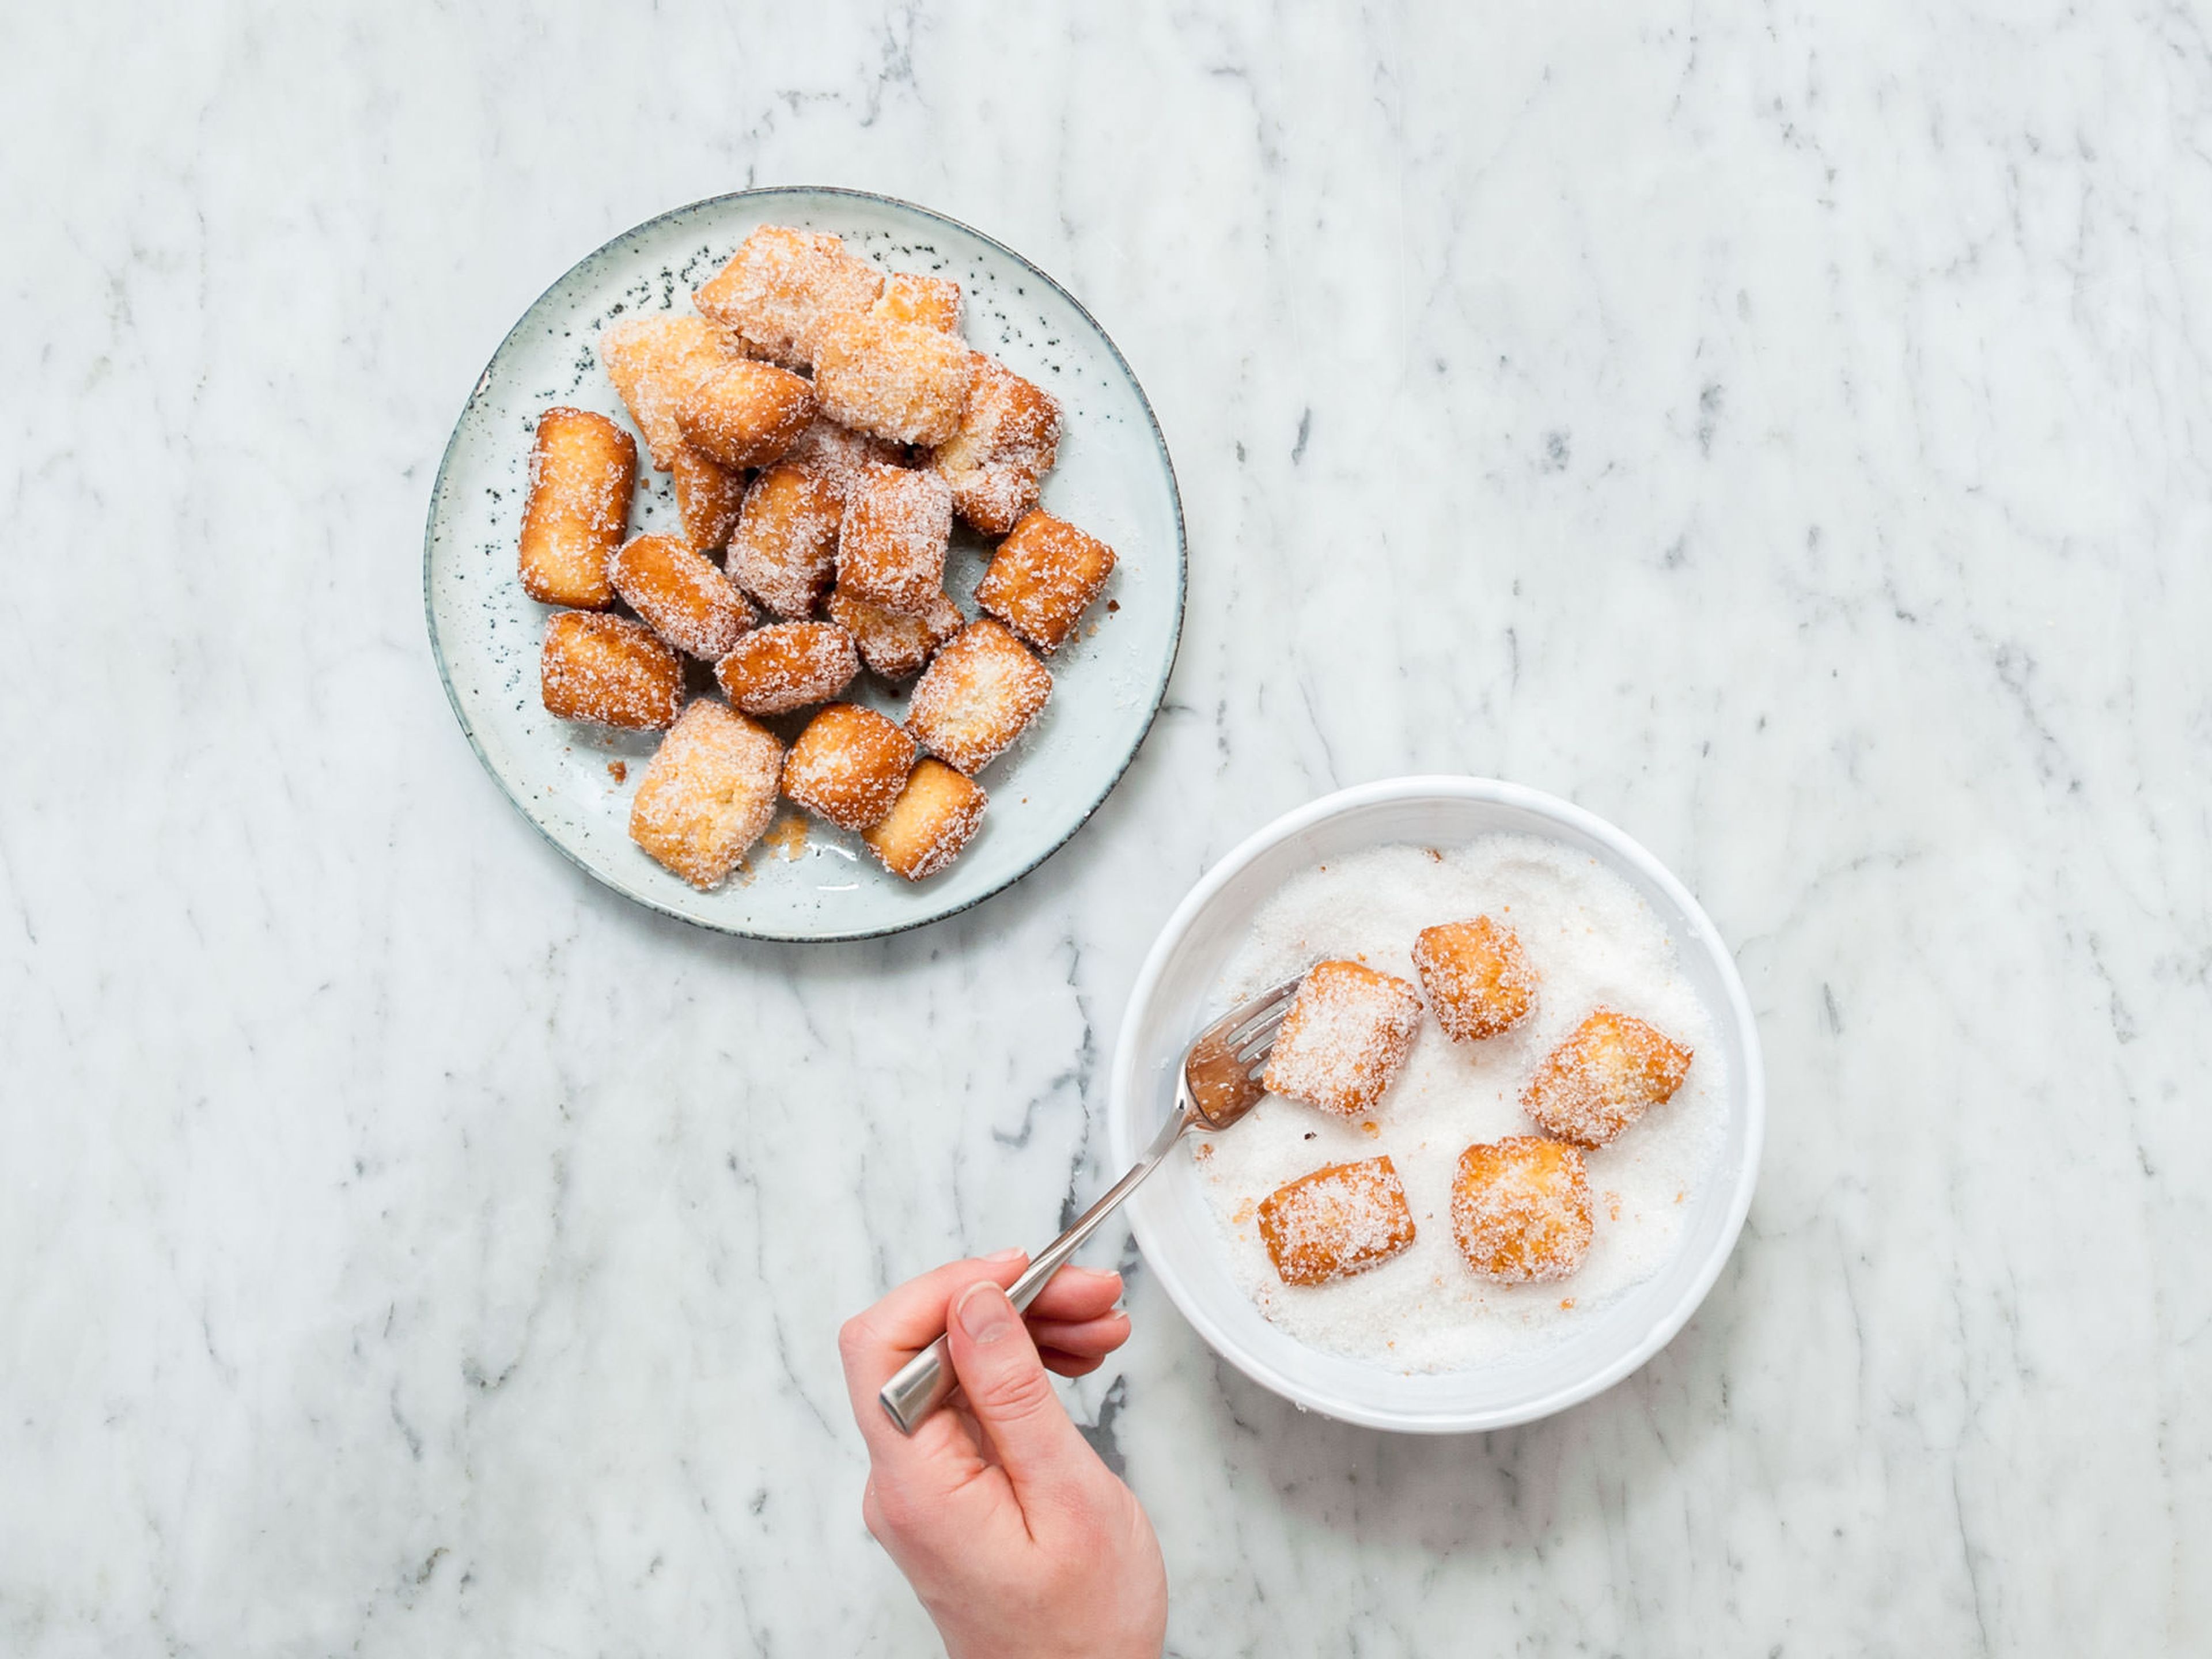 Transfer sugar onto a plate and roll deep-fried dough bites in it while they are still warm. Toss to coat. Repeat until all dough bites are completely sugar coated. Enjoy!